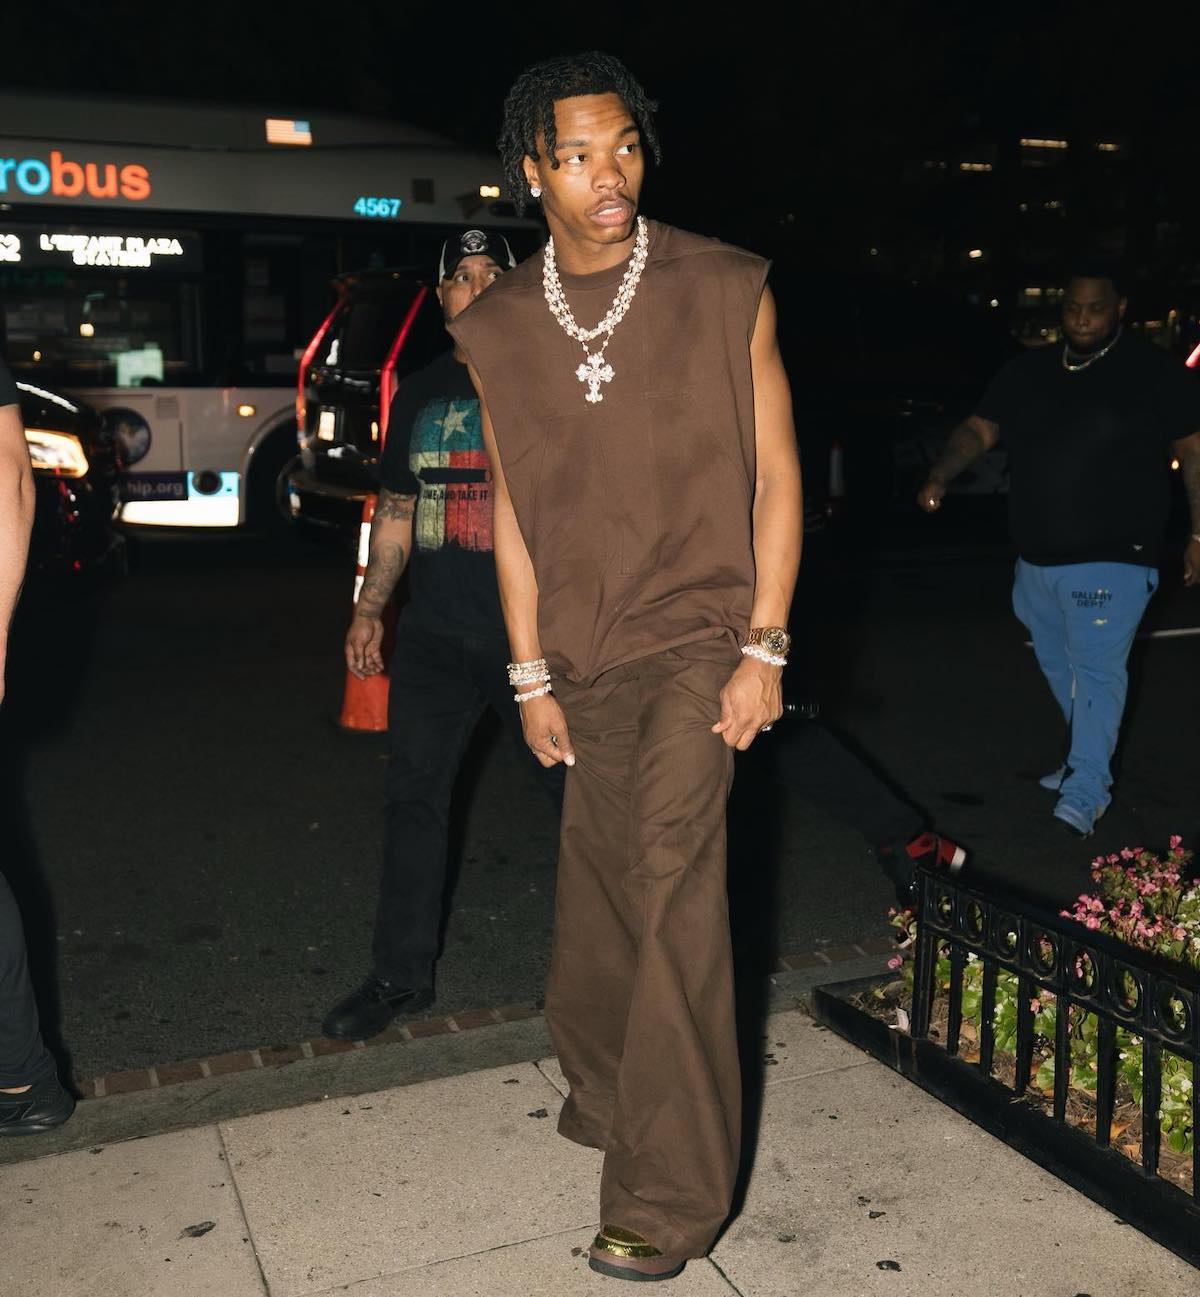 Playboi Carti & ASAP Rocky are frequently spotted in Rick Owens